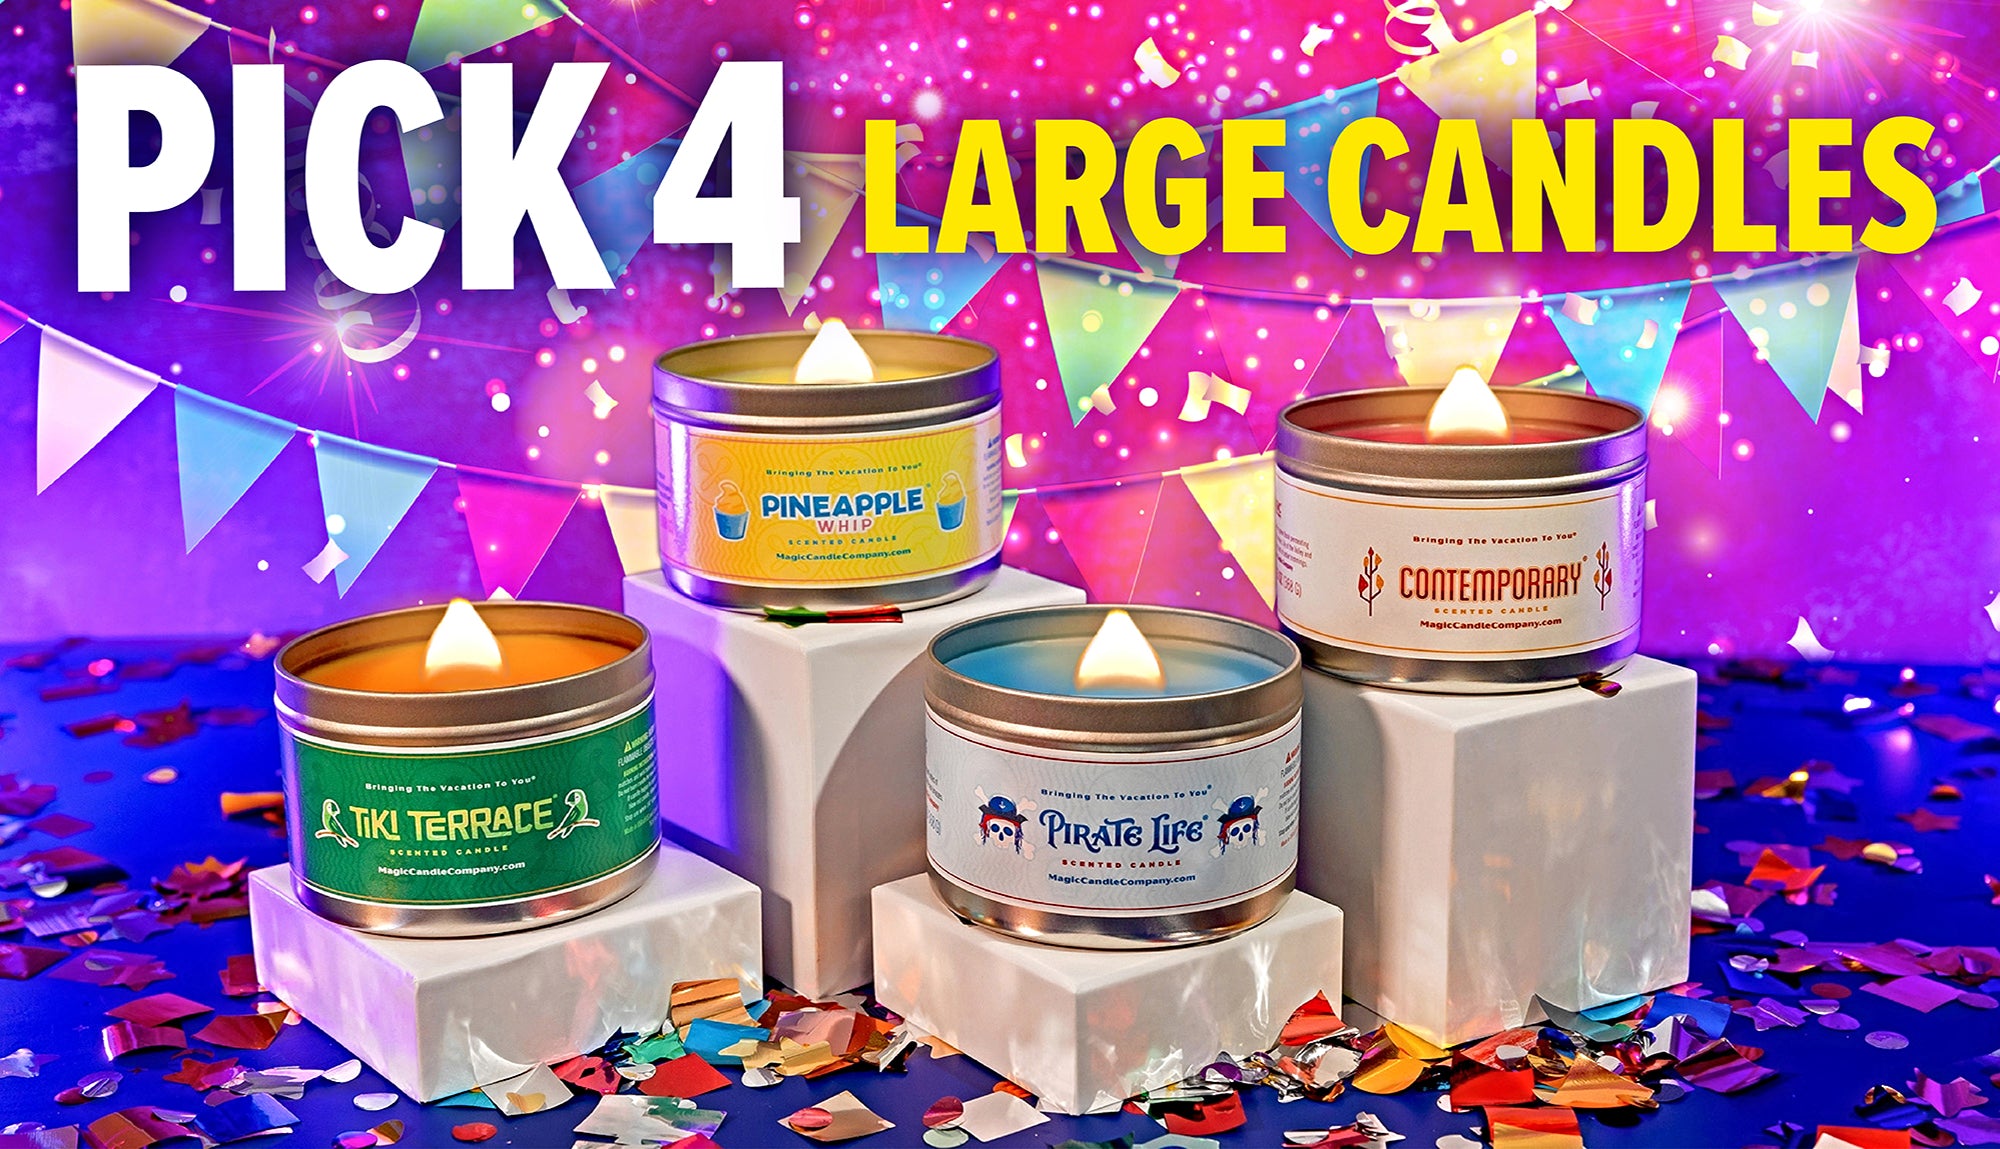 Pick 4 Large Candles